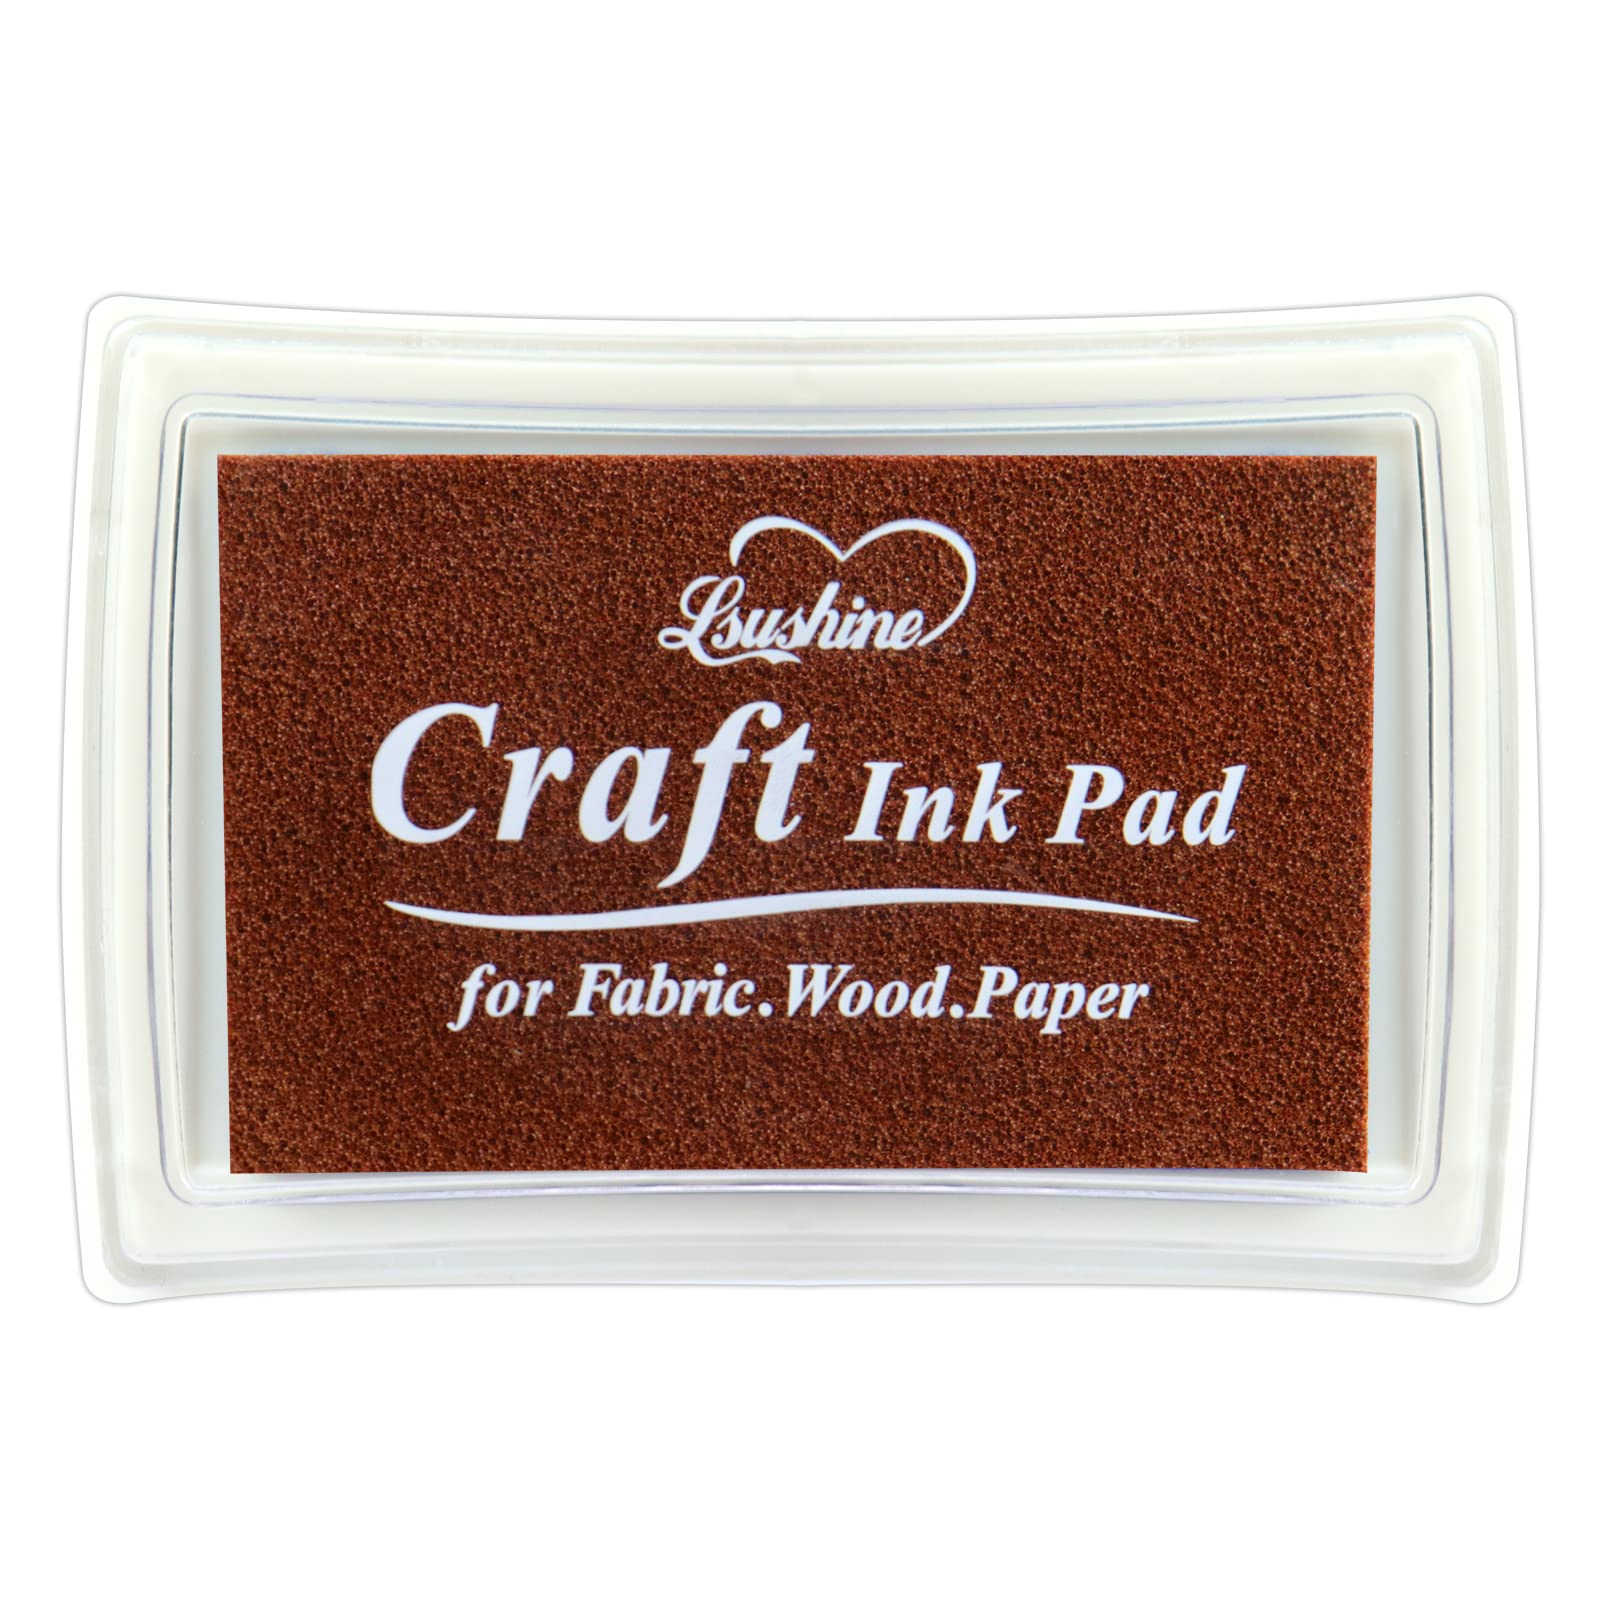 Lsushine craft Ink Pad for Rubber Stamps, Paper, Wooden, Fabric,  Scrapbooking, Non-Toxic Finger Ink Pads for Kids (Brown)